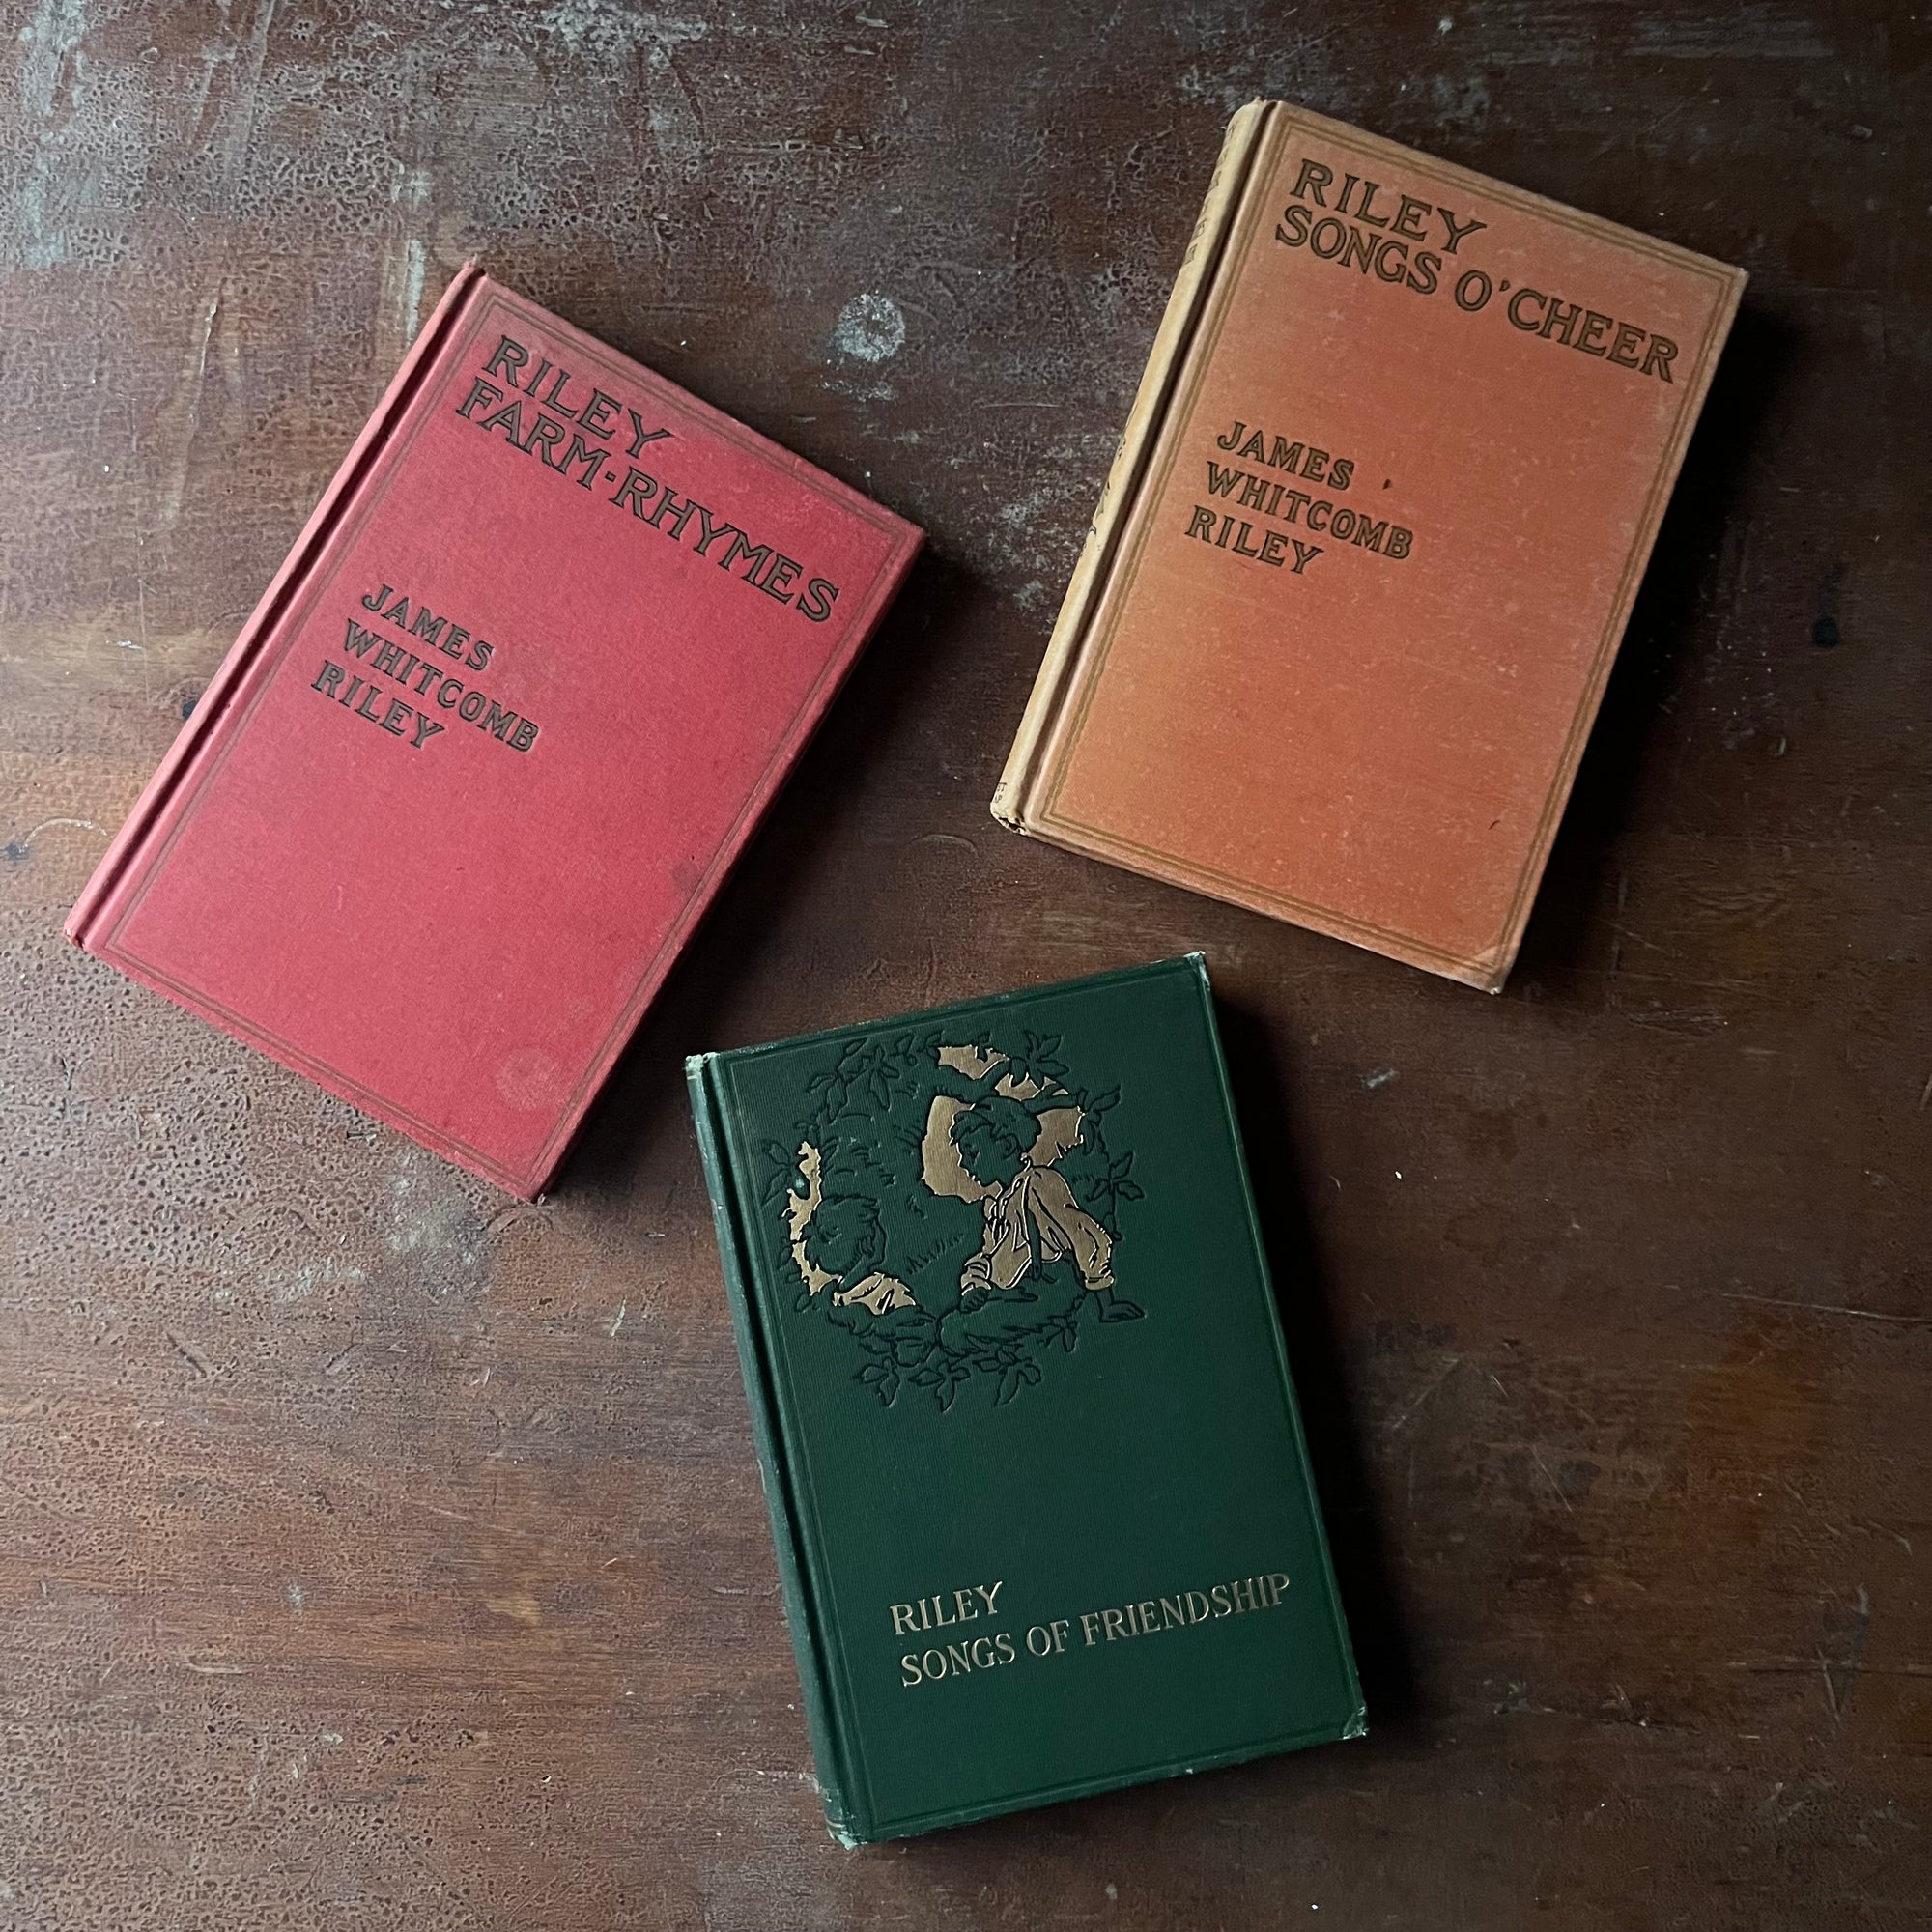 Set of Three Poetry Books written by James Whitcomb Riley:  Riley Songs of Friendship, Riley Songs O' Cheer & Riley Farm-Rhymes - view of the embossed front covers in different colors